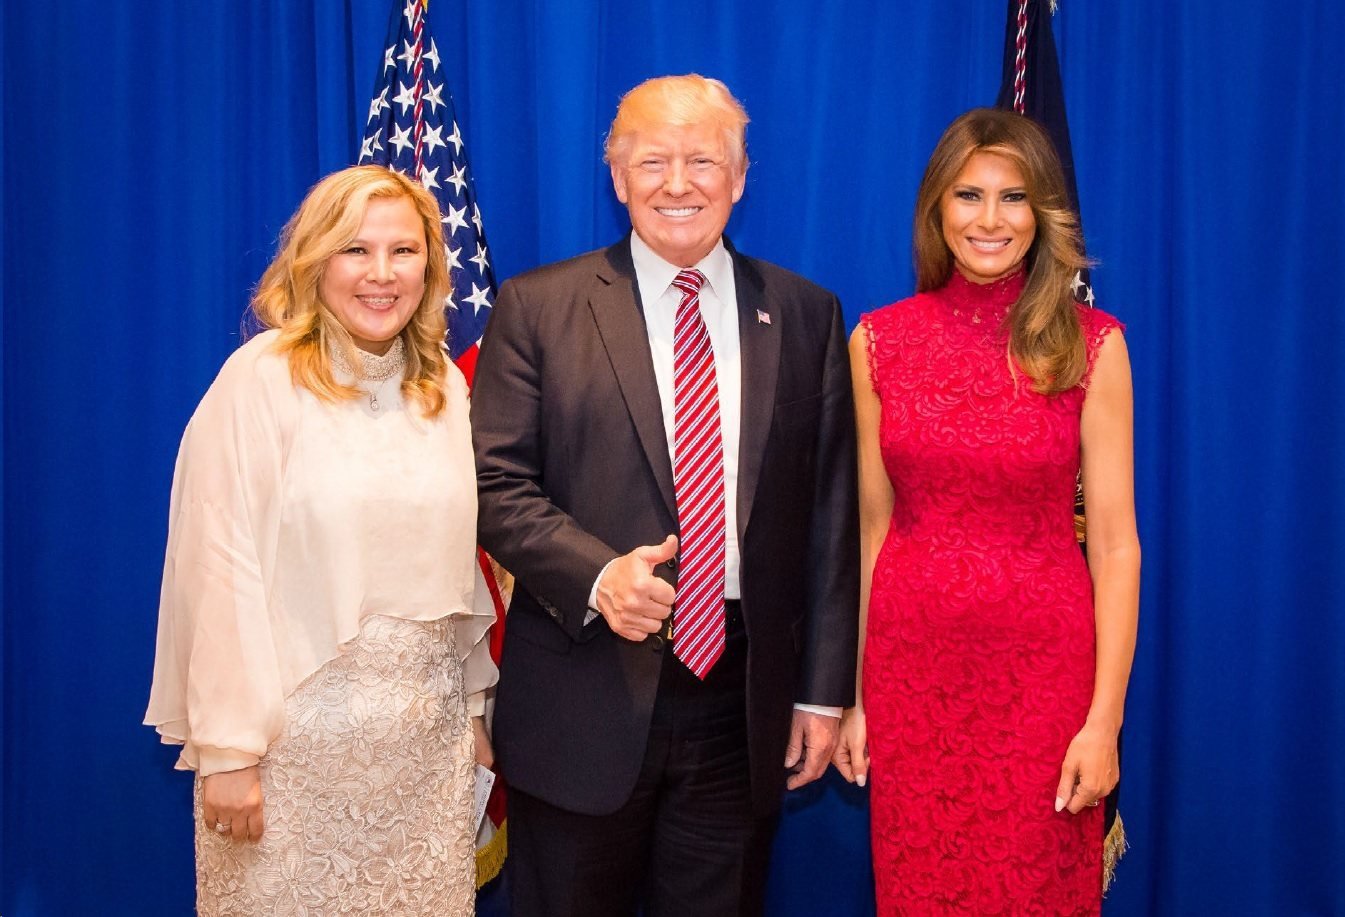 Sherry Li and Lianbo Wang used a photograph taken at a June 2017 event of Li smiling with then US President Donald Trump and first lady Melania Trump to solicit investment for their theme park project, US prosecutors said. Photo: US Justice Department